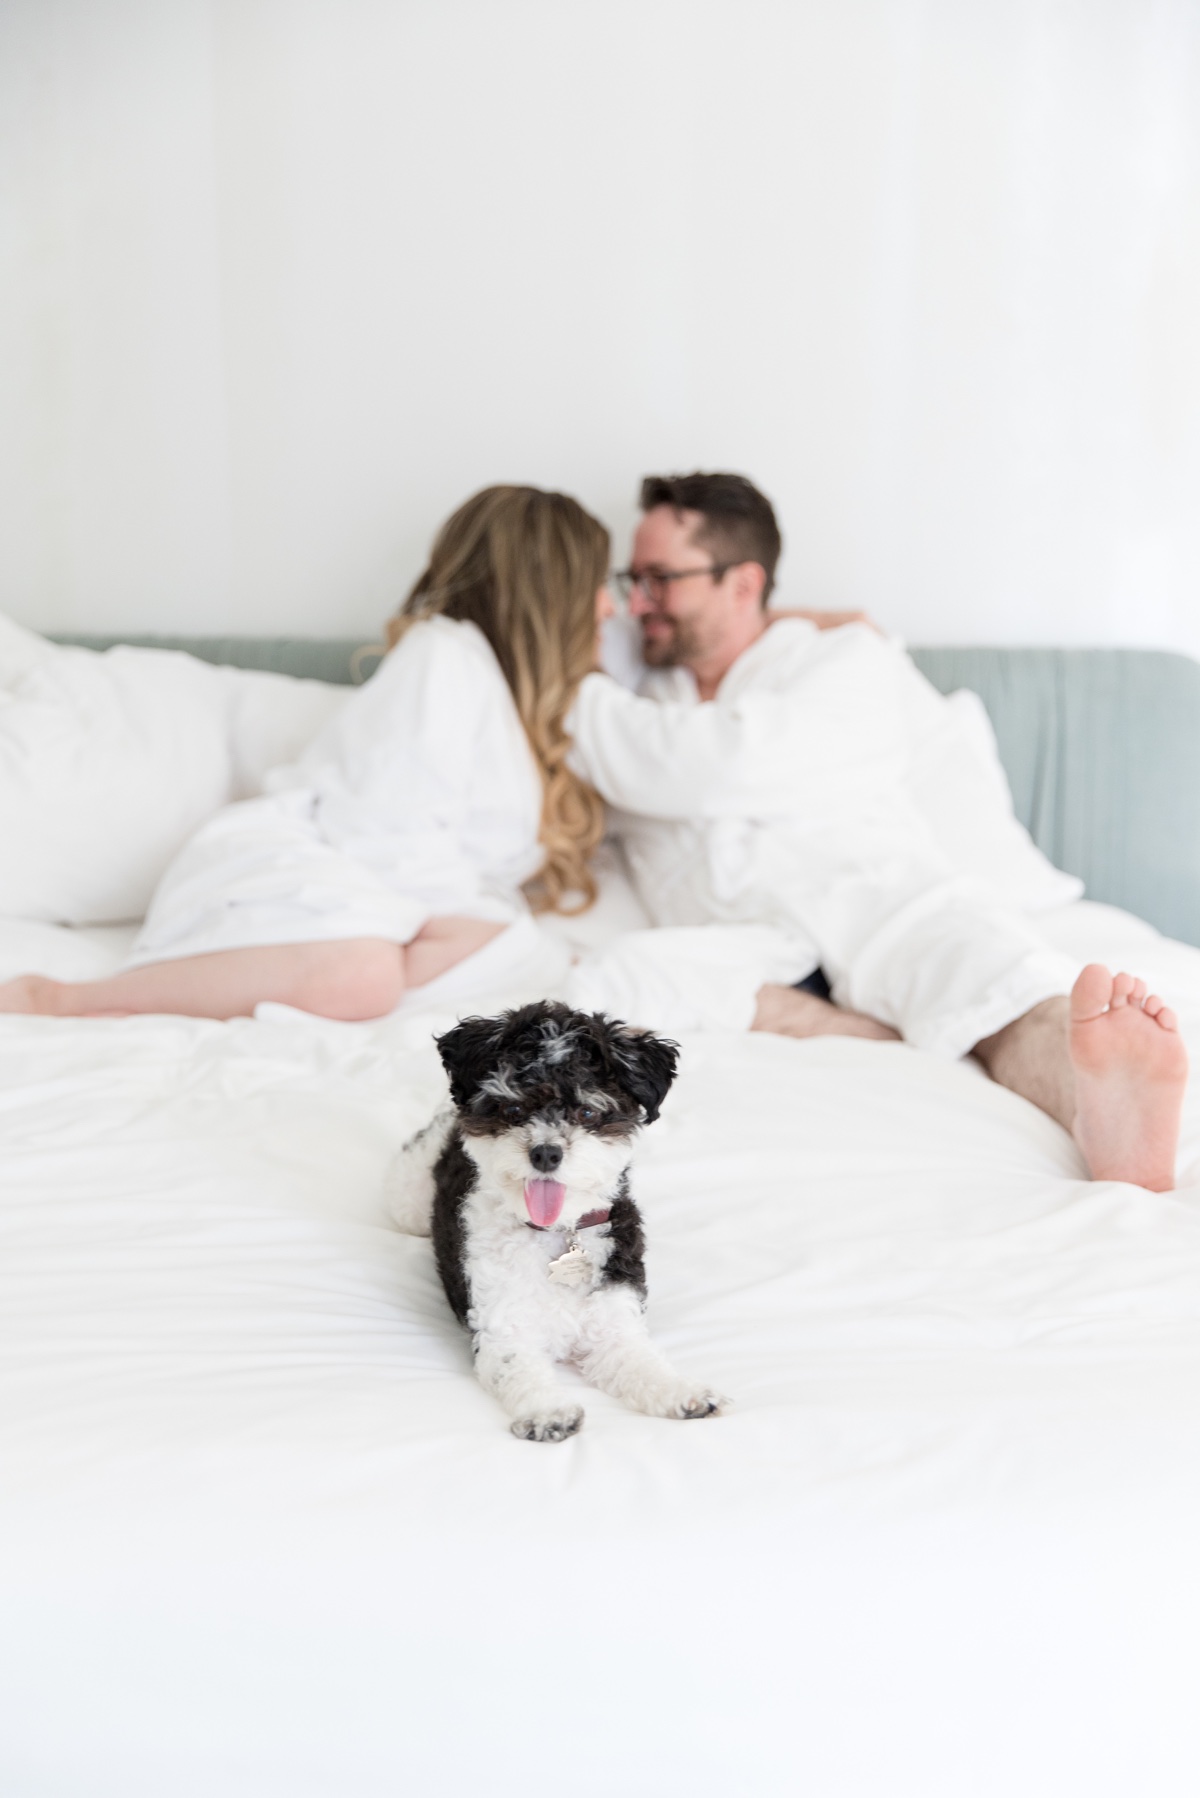 hotel engagement photos with dog and robes in los angeles